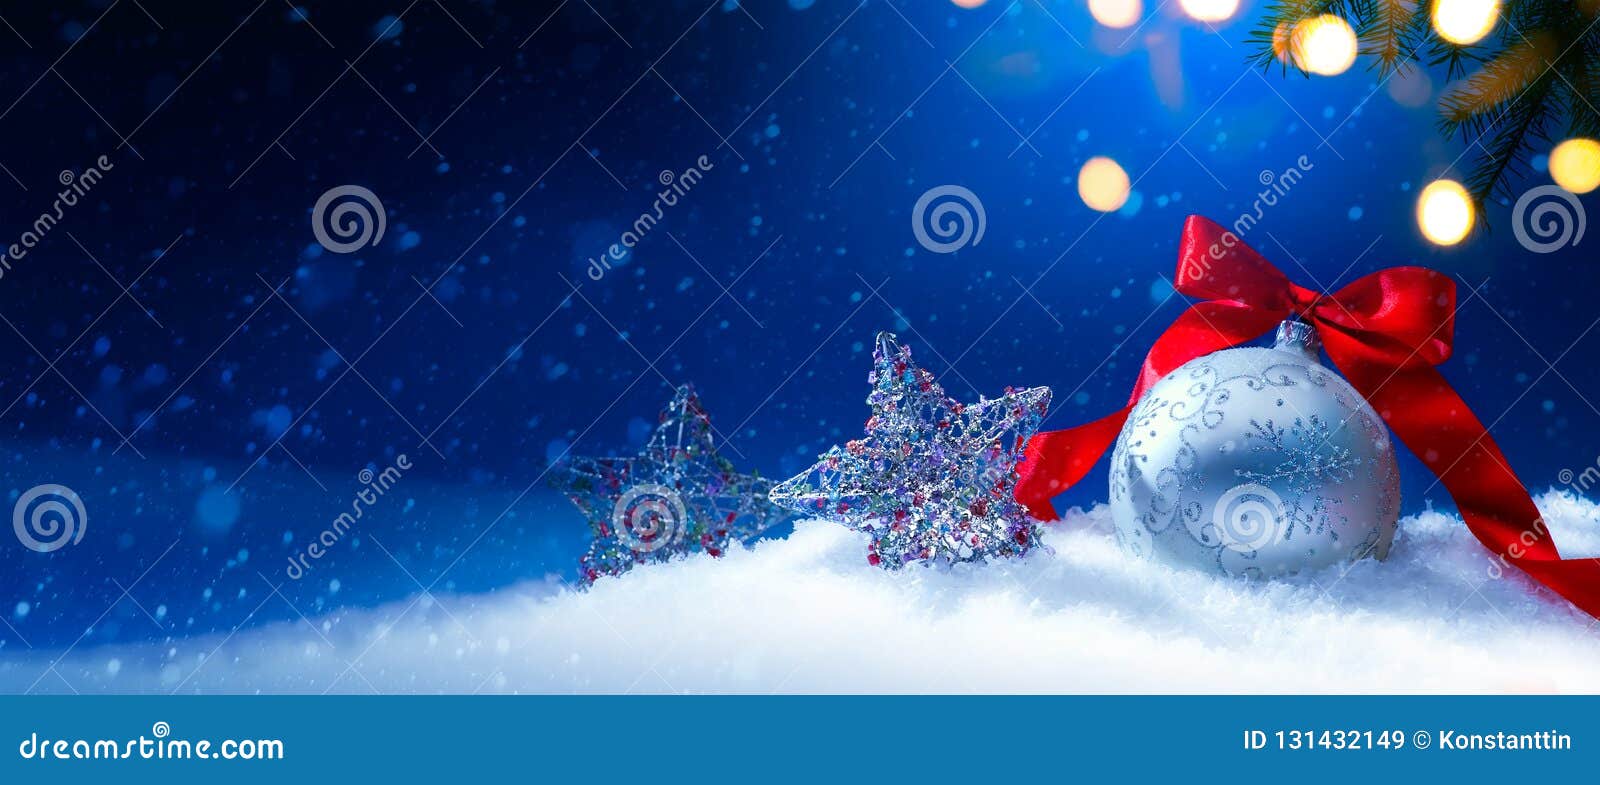 blue christmas greeting card background or season holidays banner